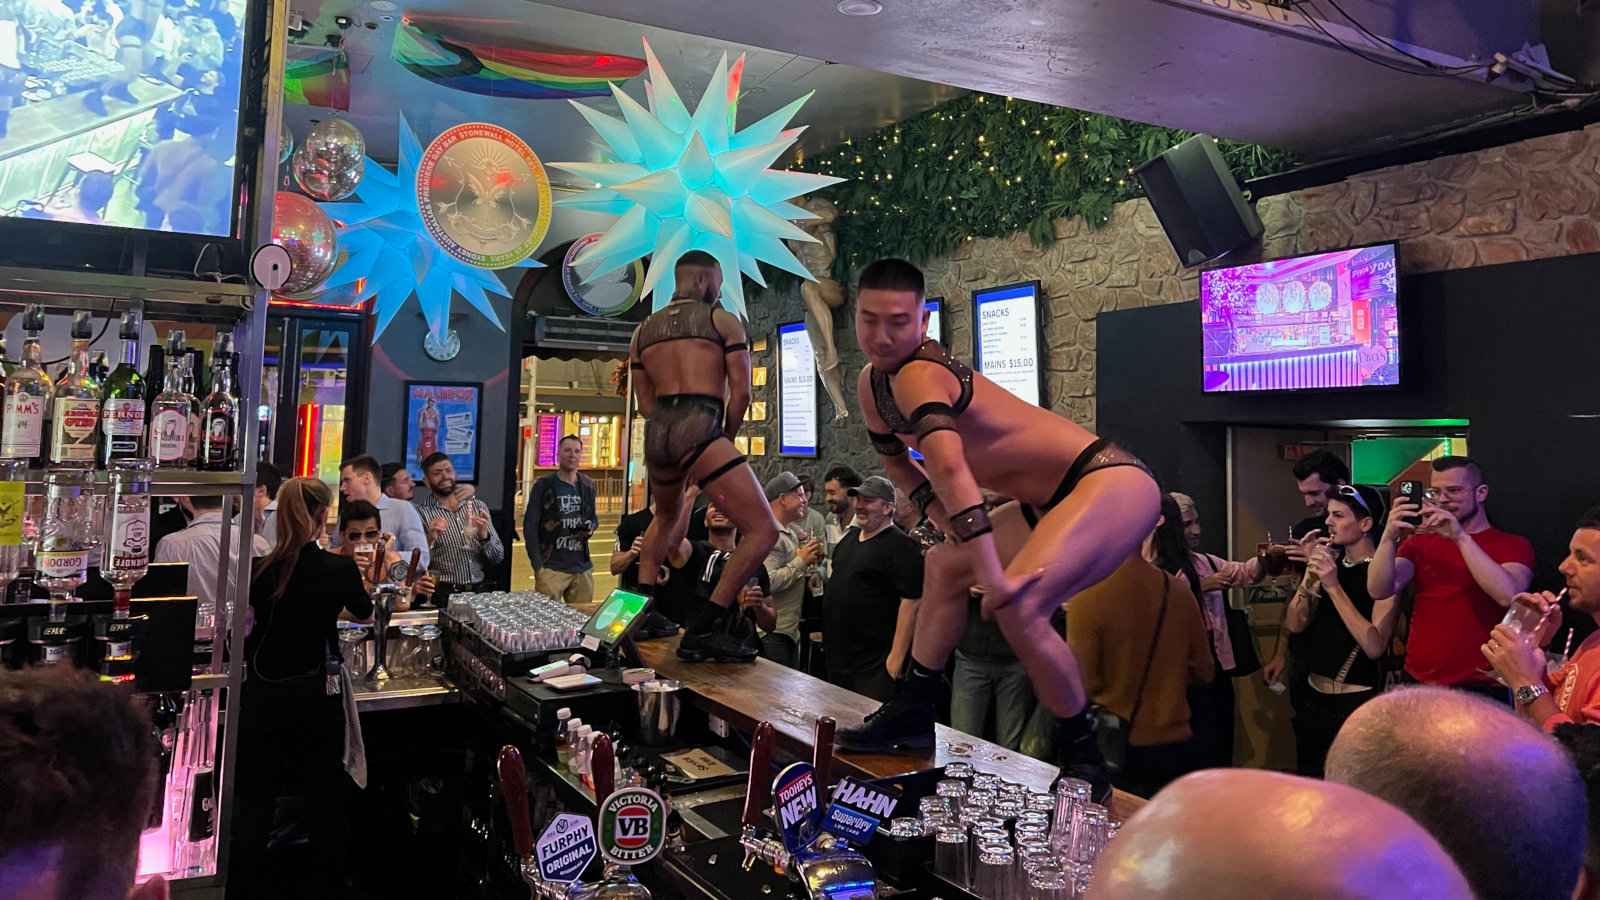 The GoGo dancers at the Stonewall gay bar in Sydney.